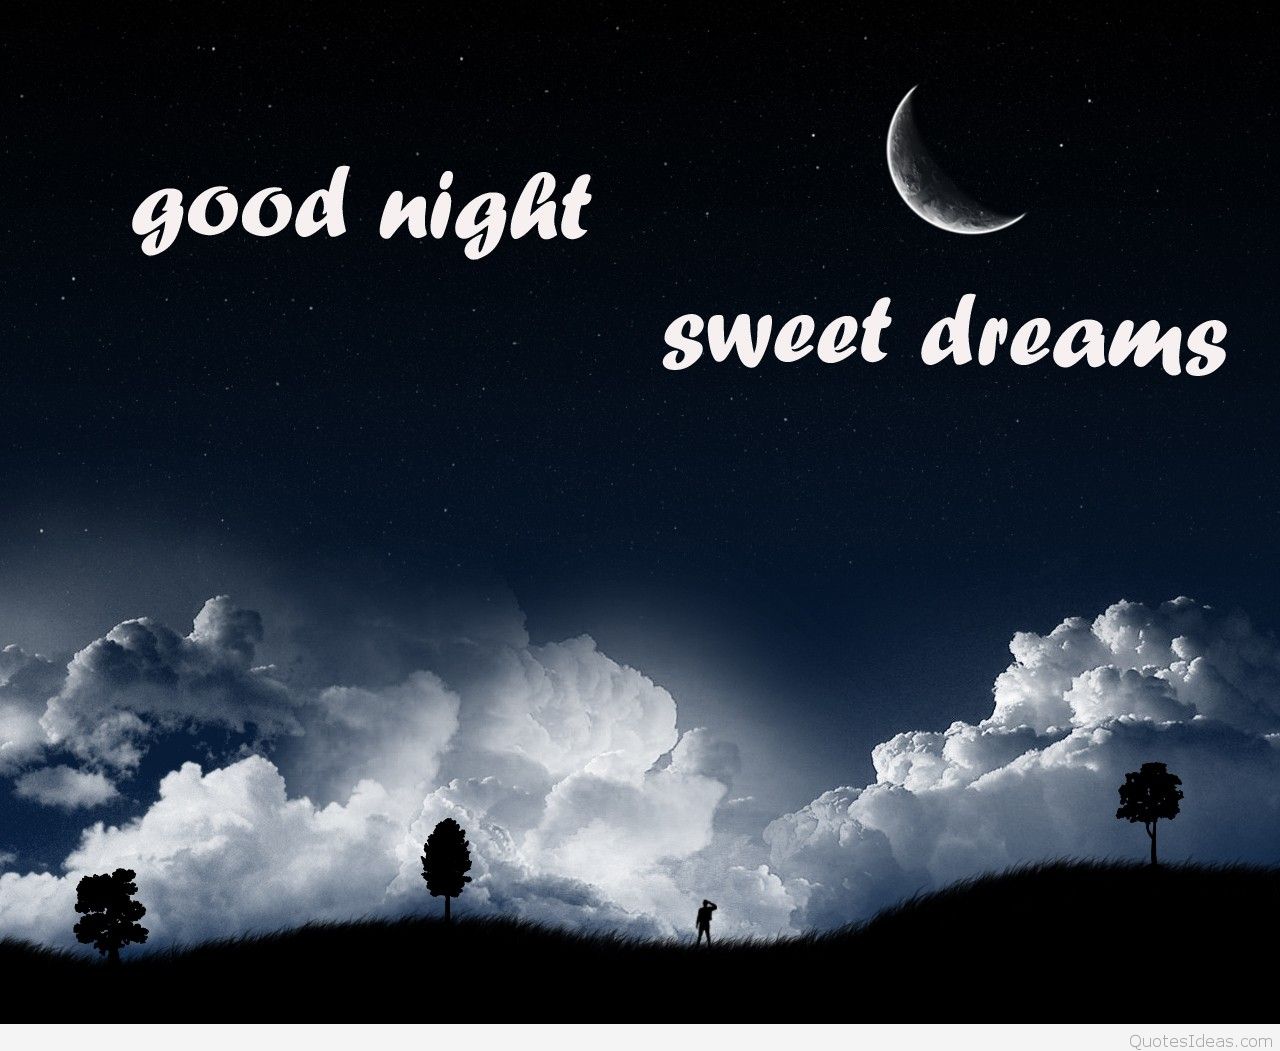 Good Night Sweet Dreams Quotes Hd Wallpapers - Good Night Hd Images Download - HD Wallpaper 